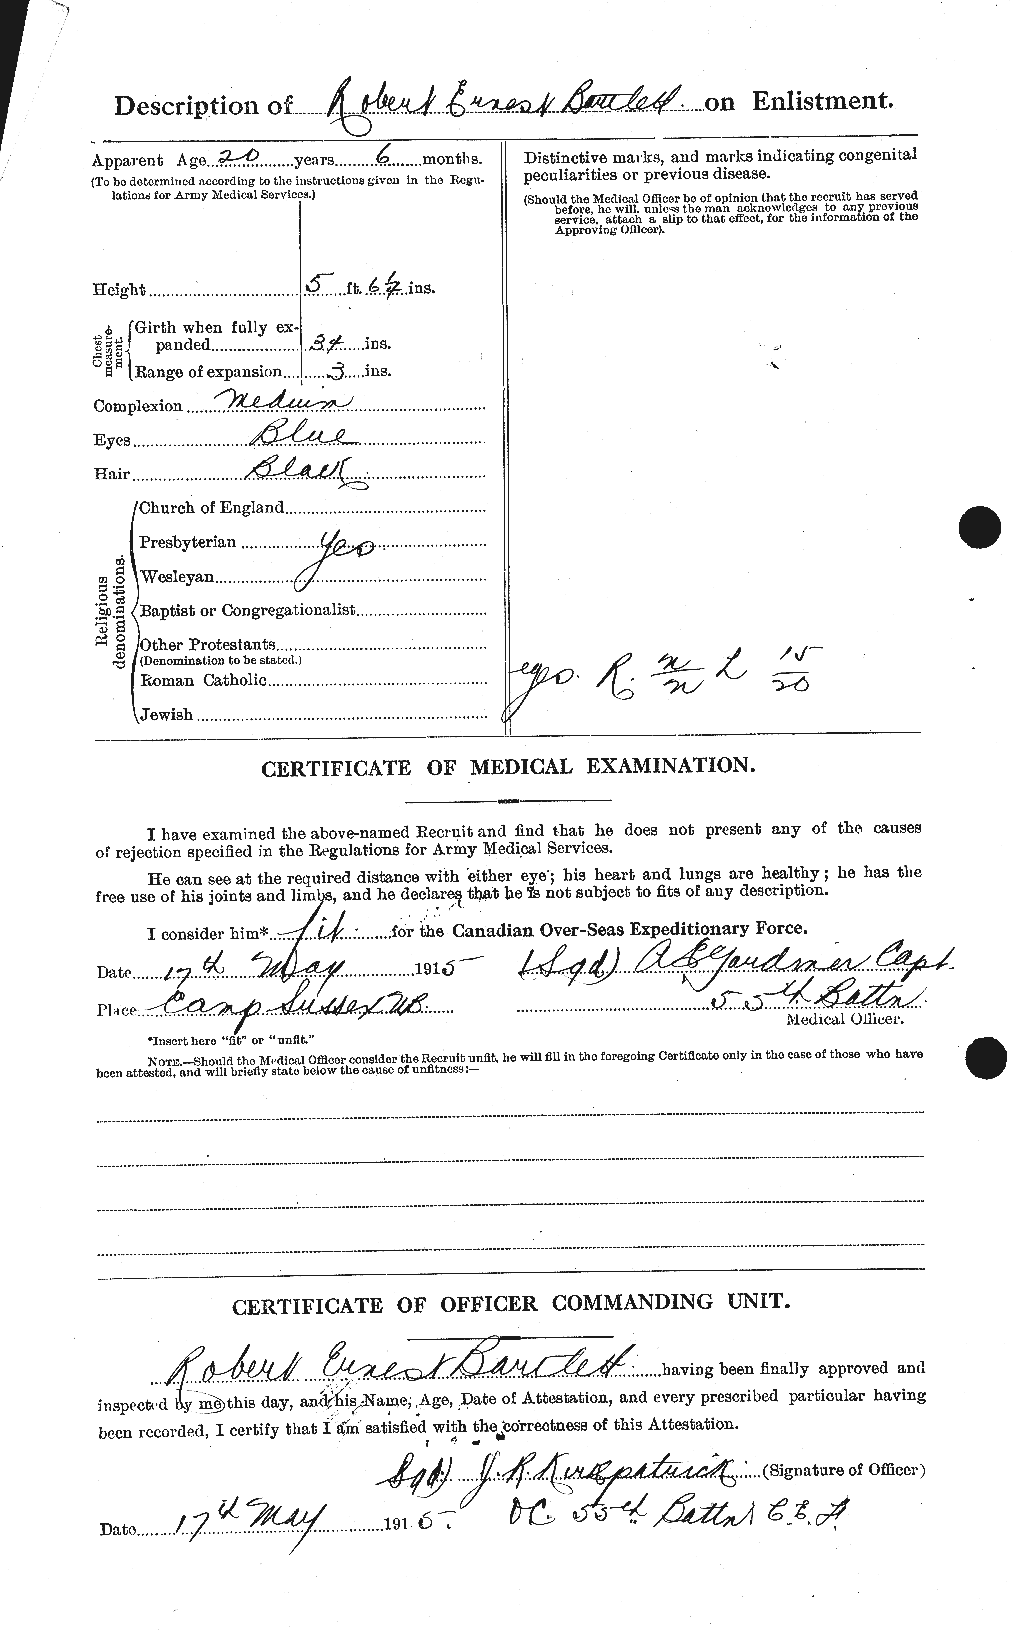 Personnel Records of the First World War - CEF 229317b